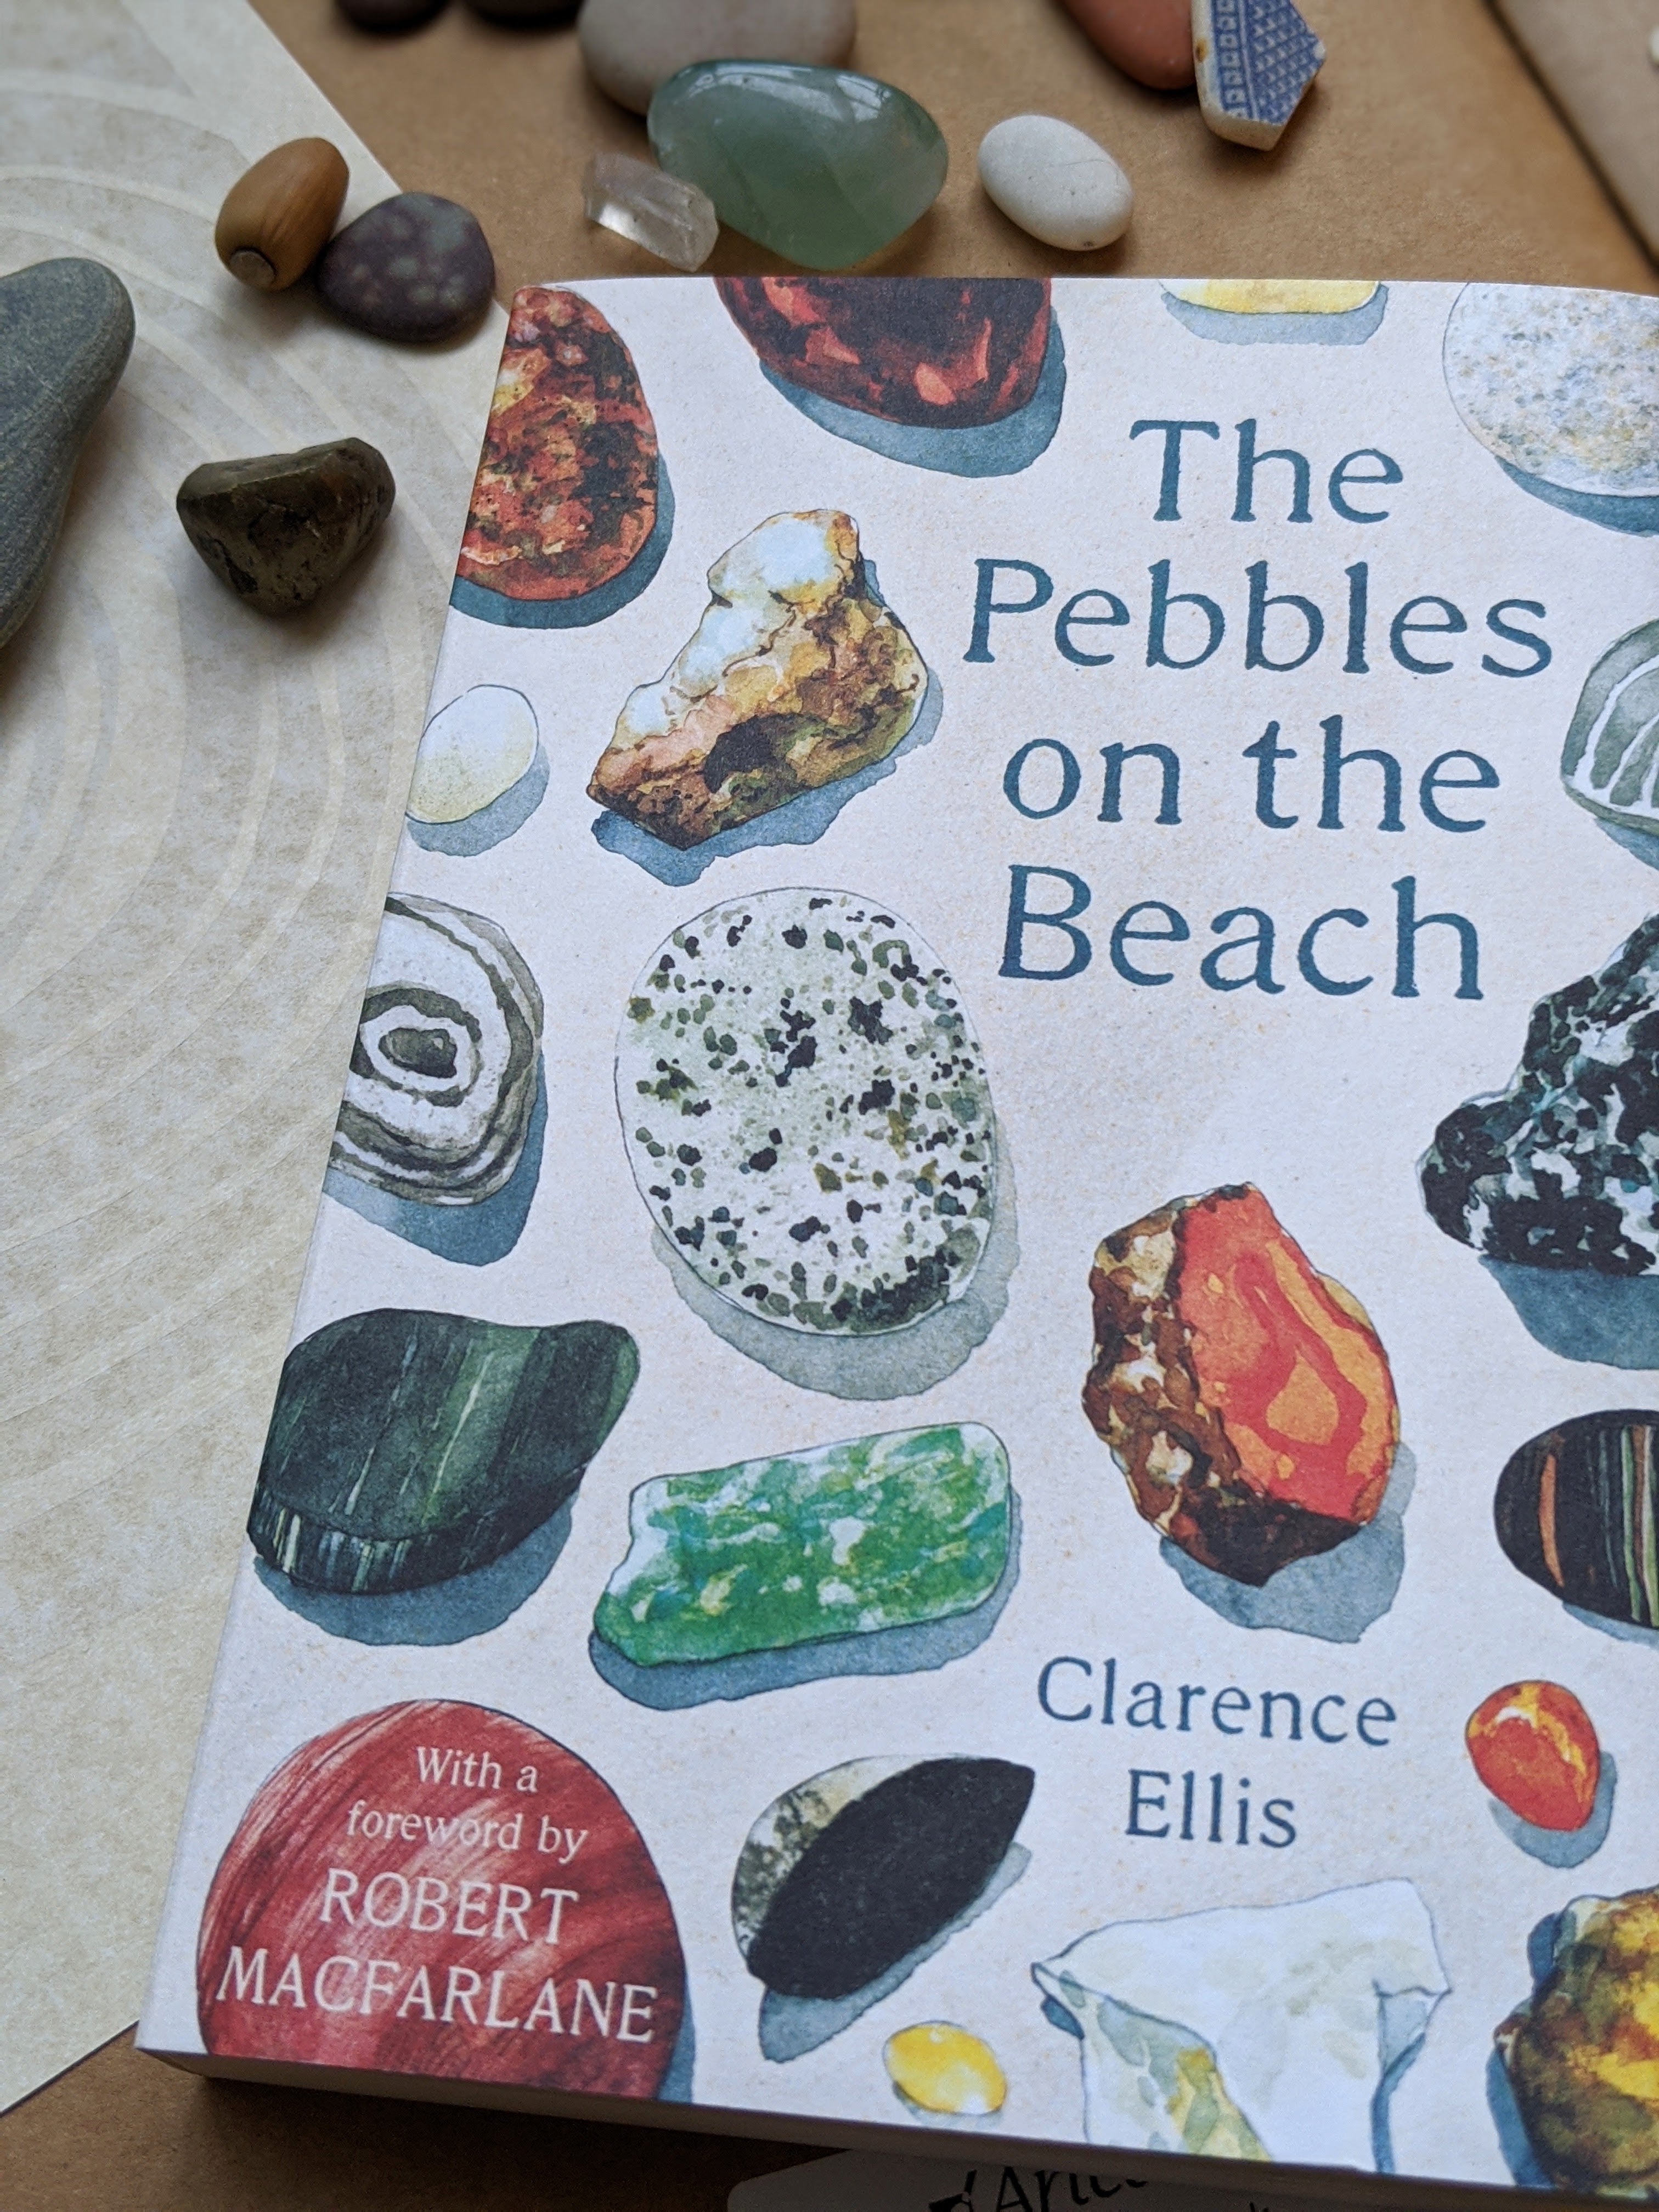 The Pebbles on the beach book by Clarence Ellis